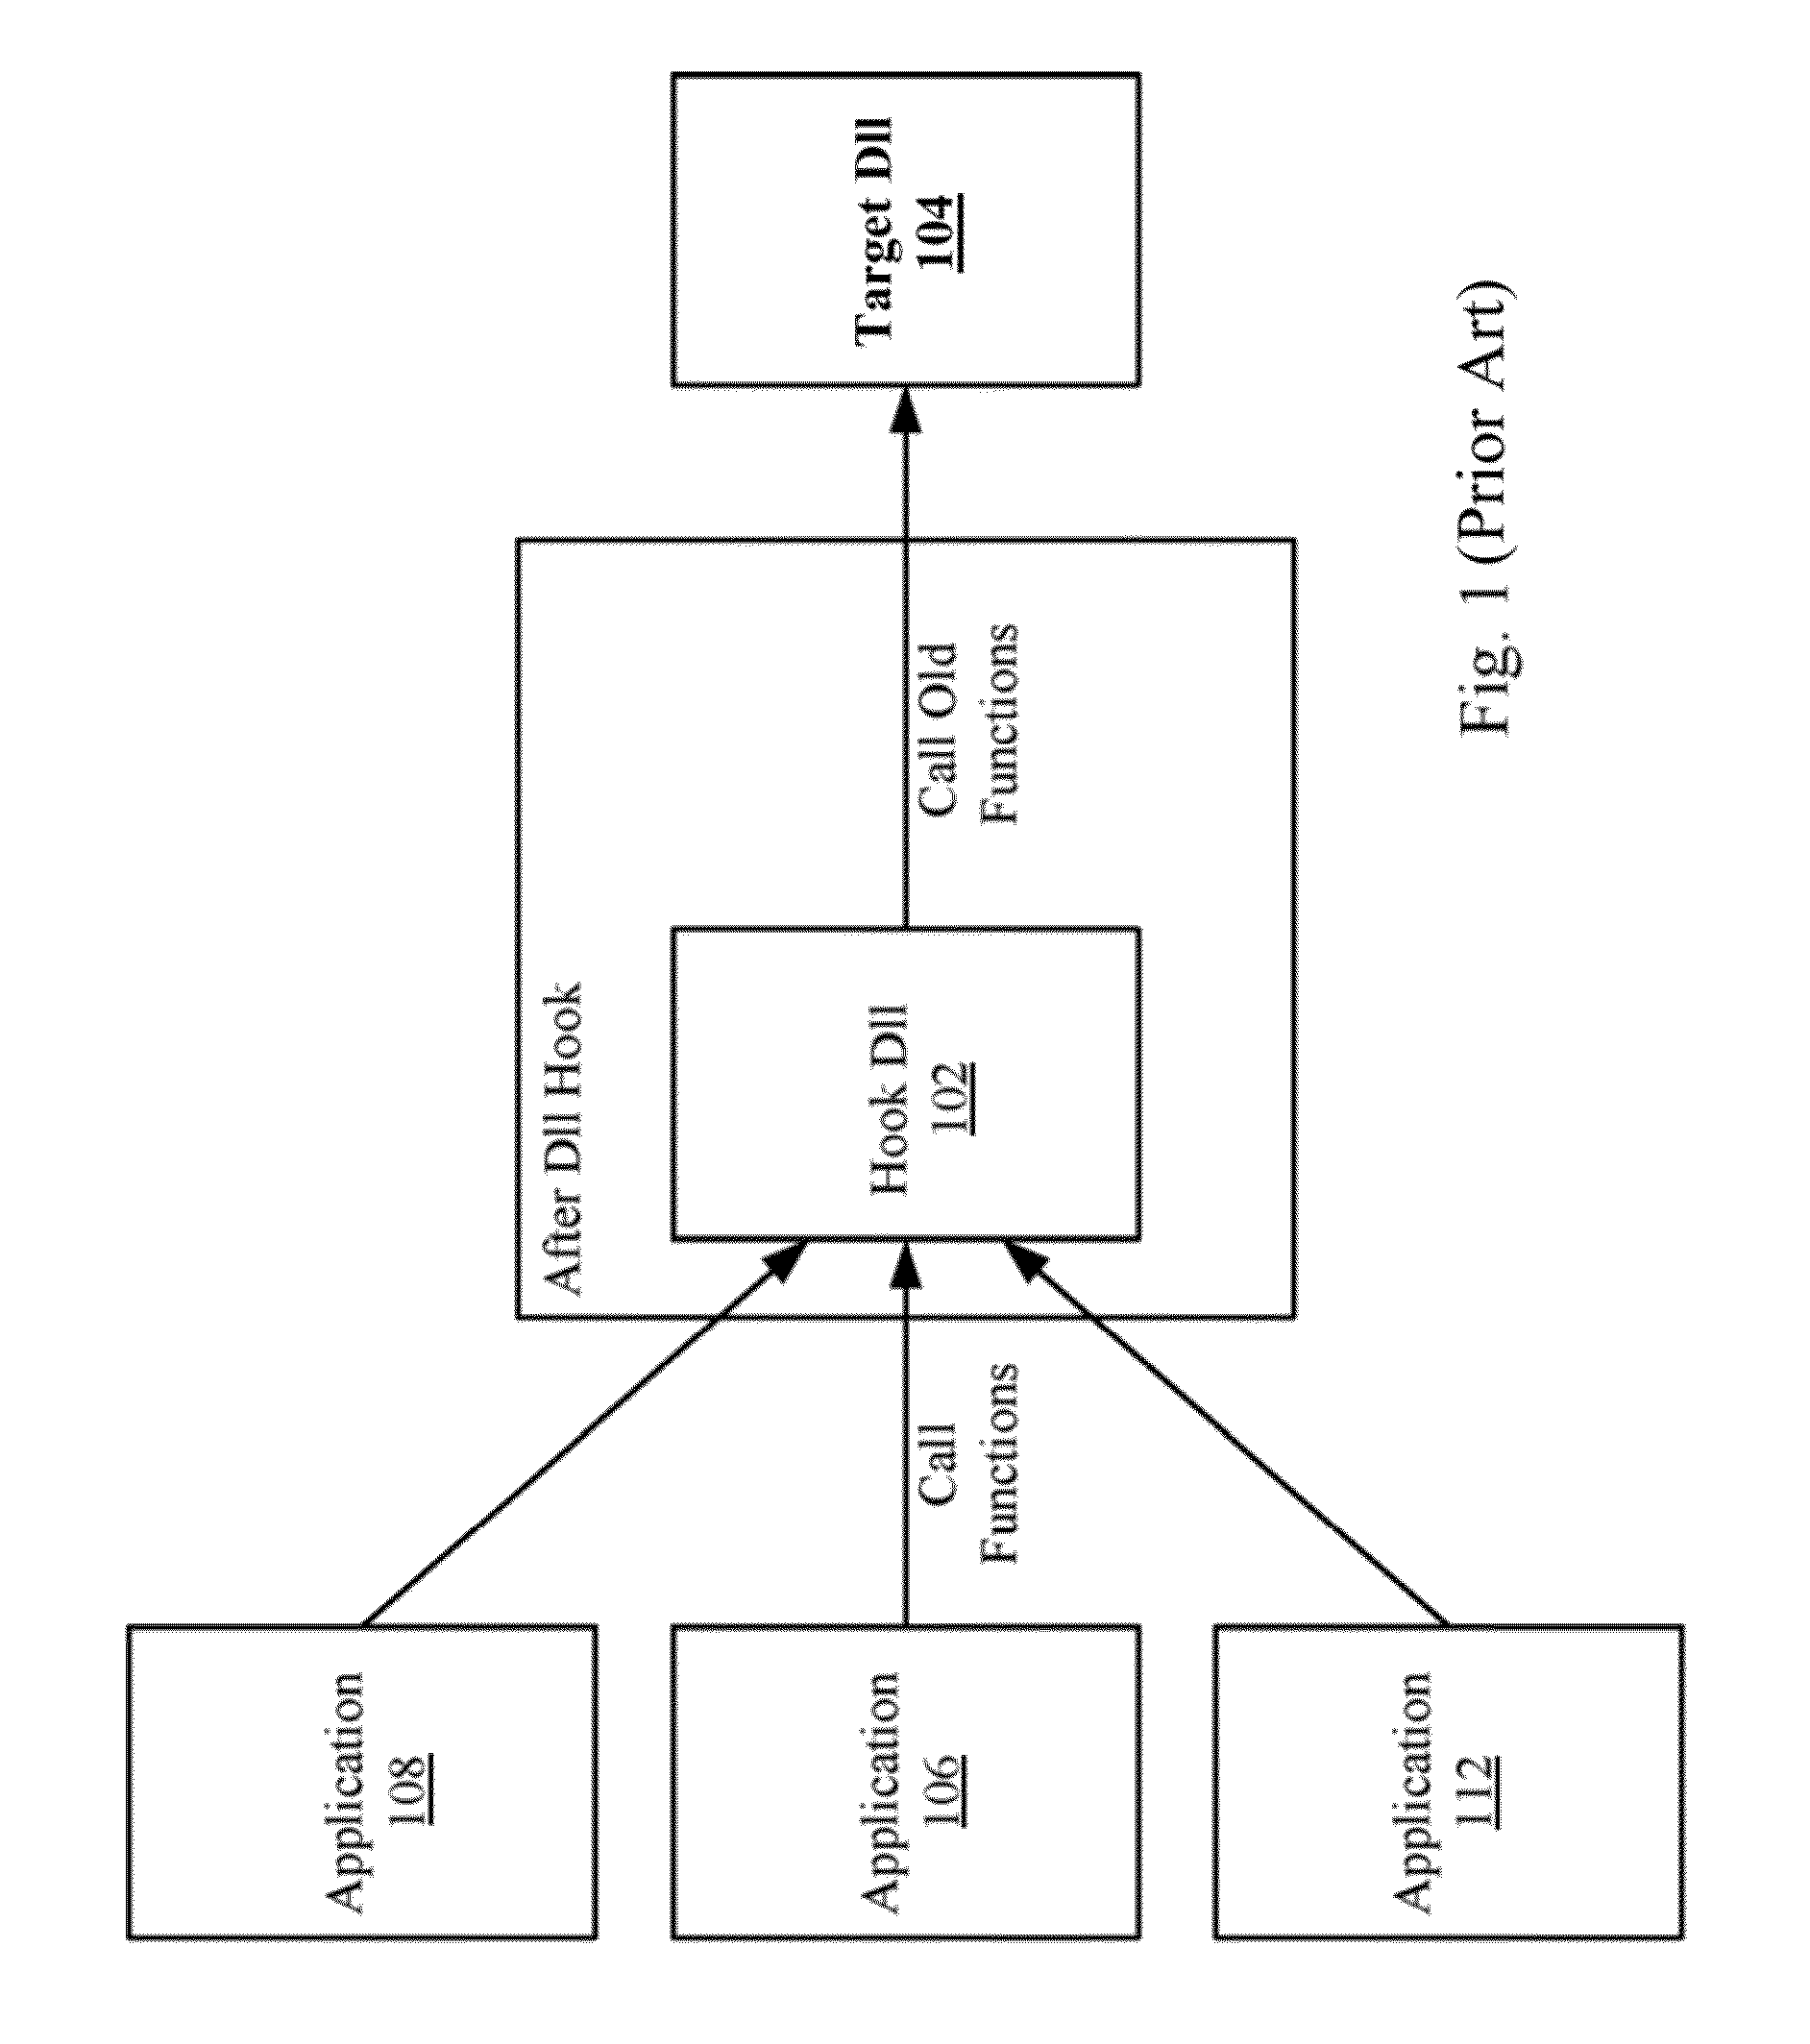 Dynamic linking library (DLL) replacement in an embedded operating system environment